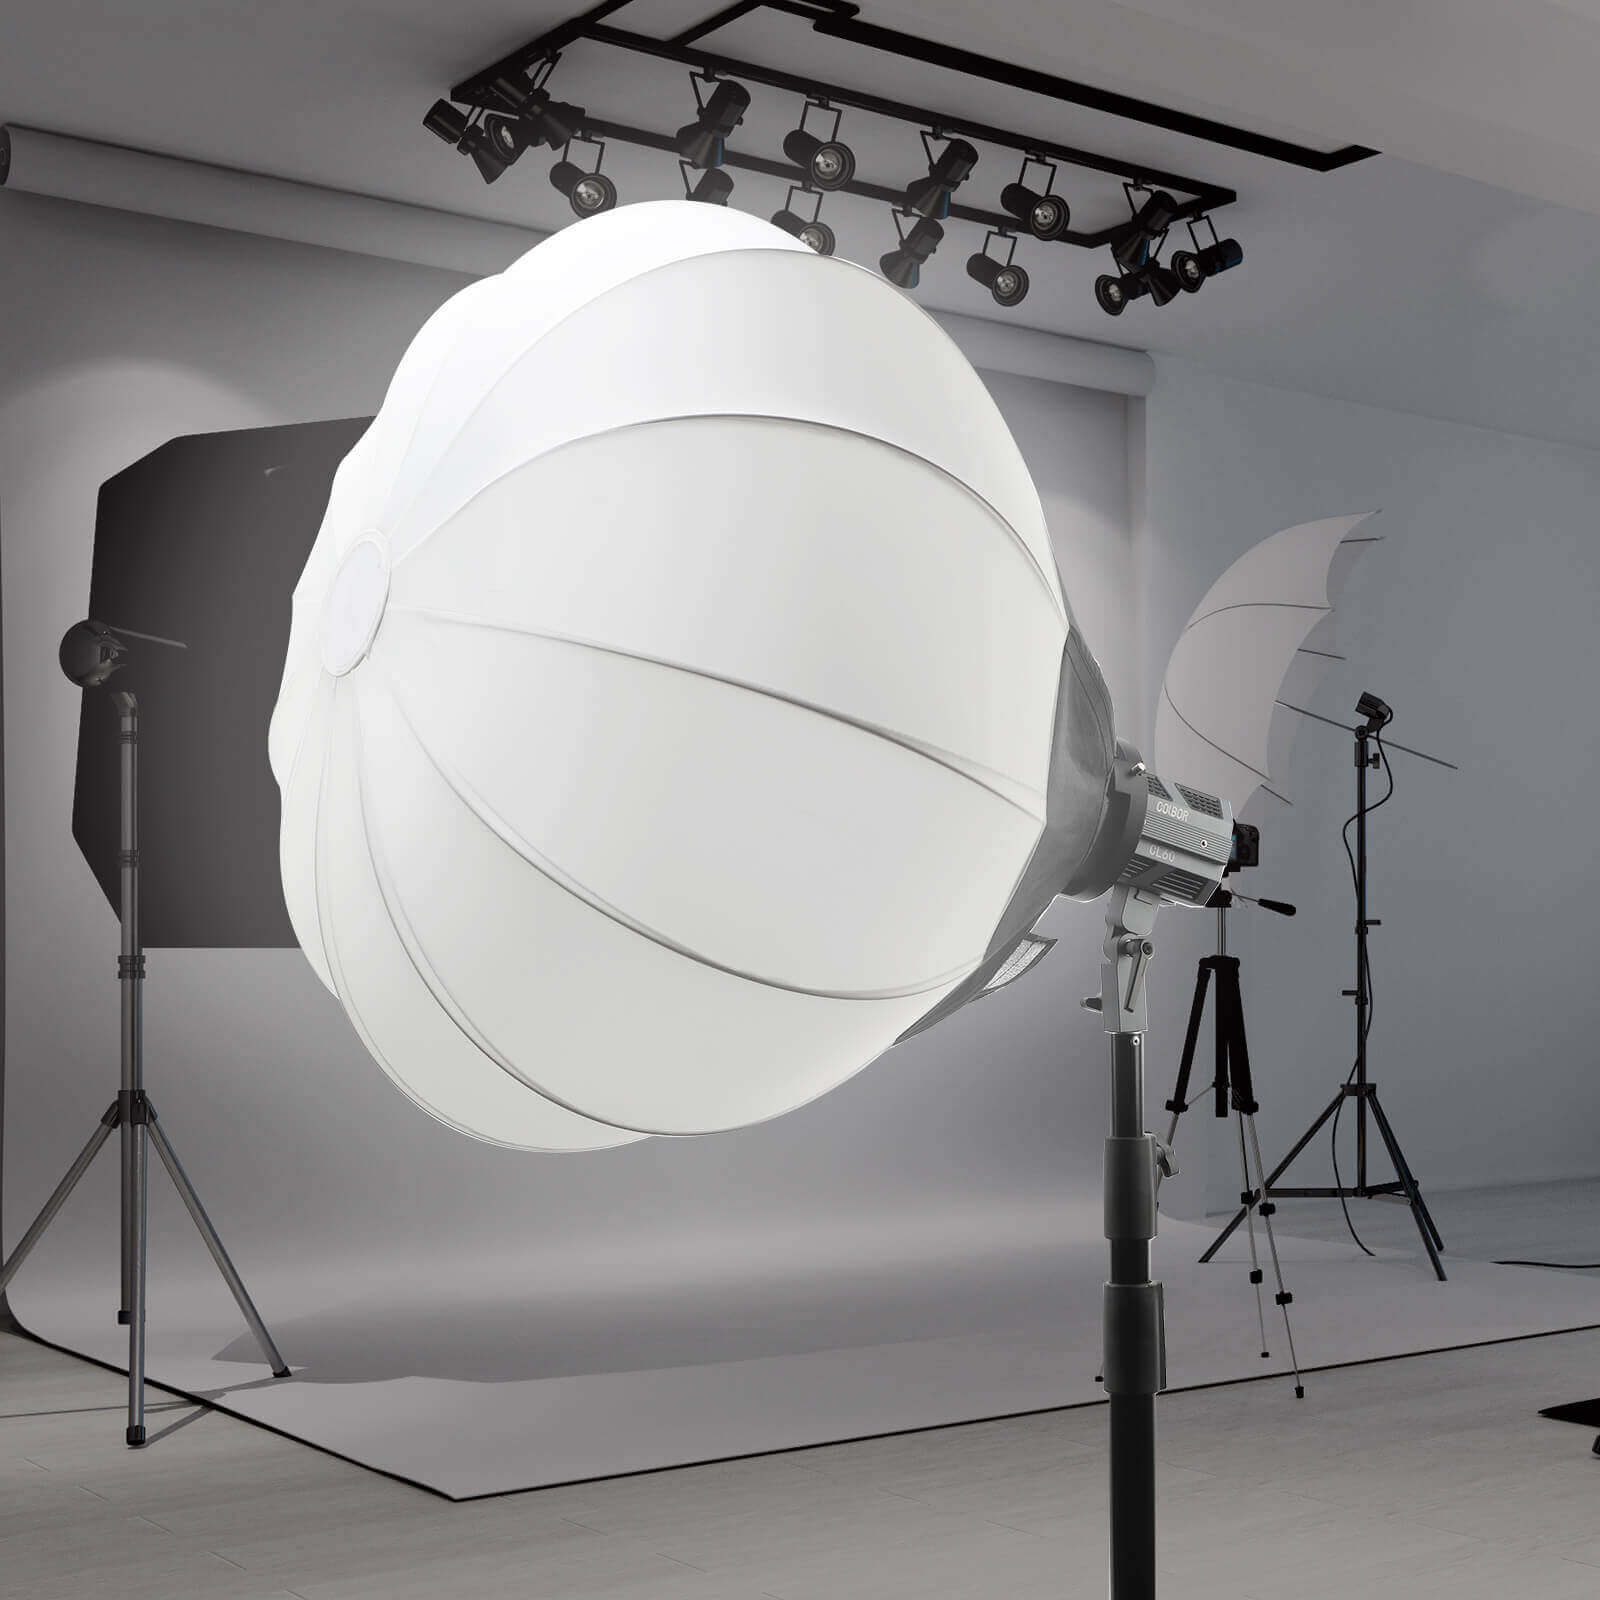 COLBOR BL65 is used with COLBOR lights to offer soft lighting for studio shooting.